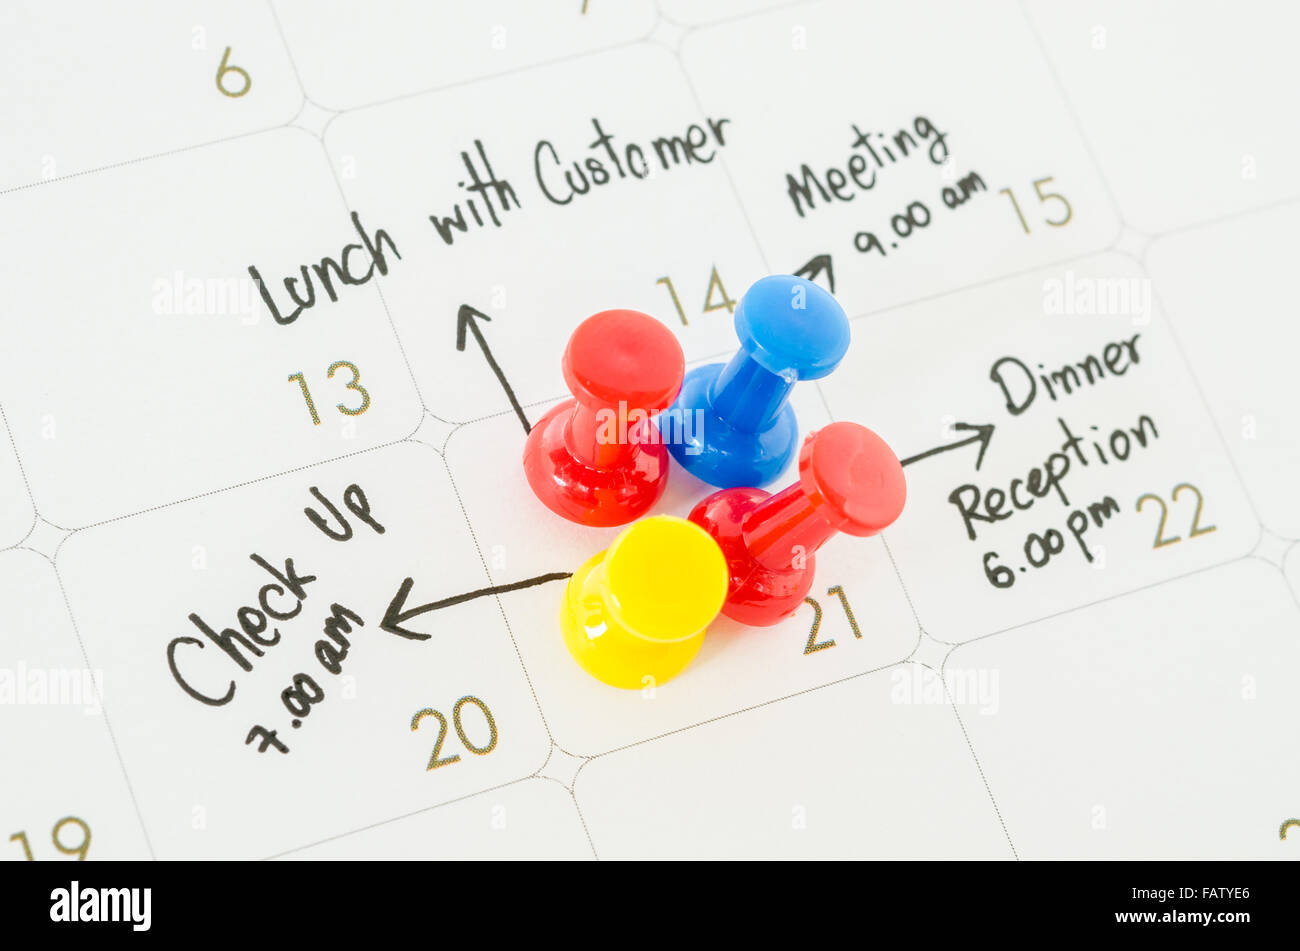 Pushpin on calendar with busy day overworked schedule. Stock Photo